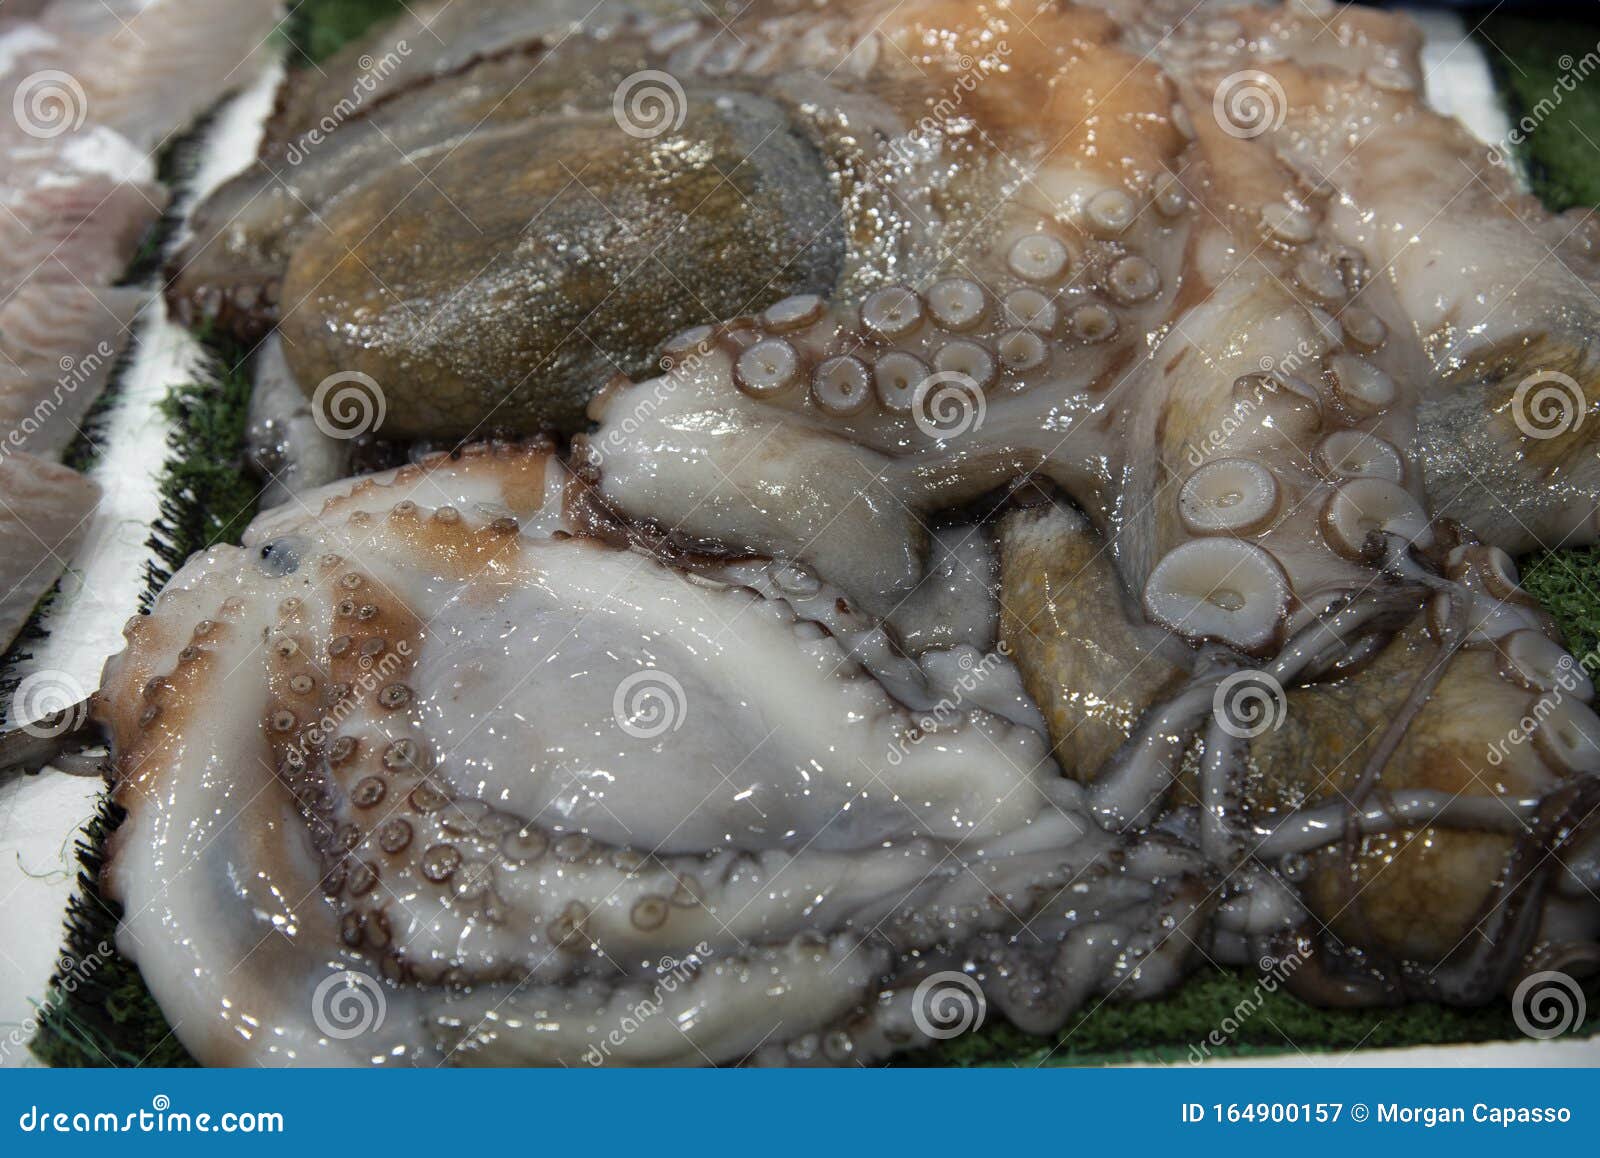 Daily Fish Market In Rome Stock Image Image Of Animal